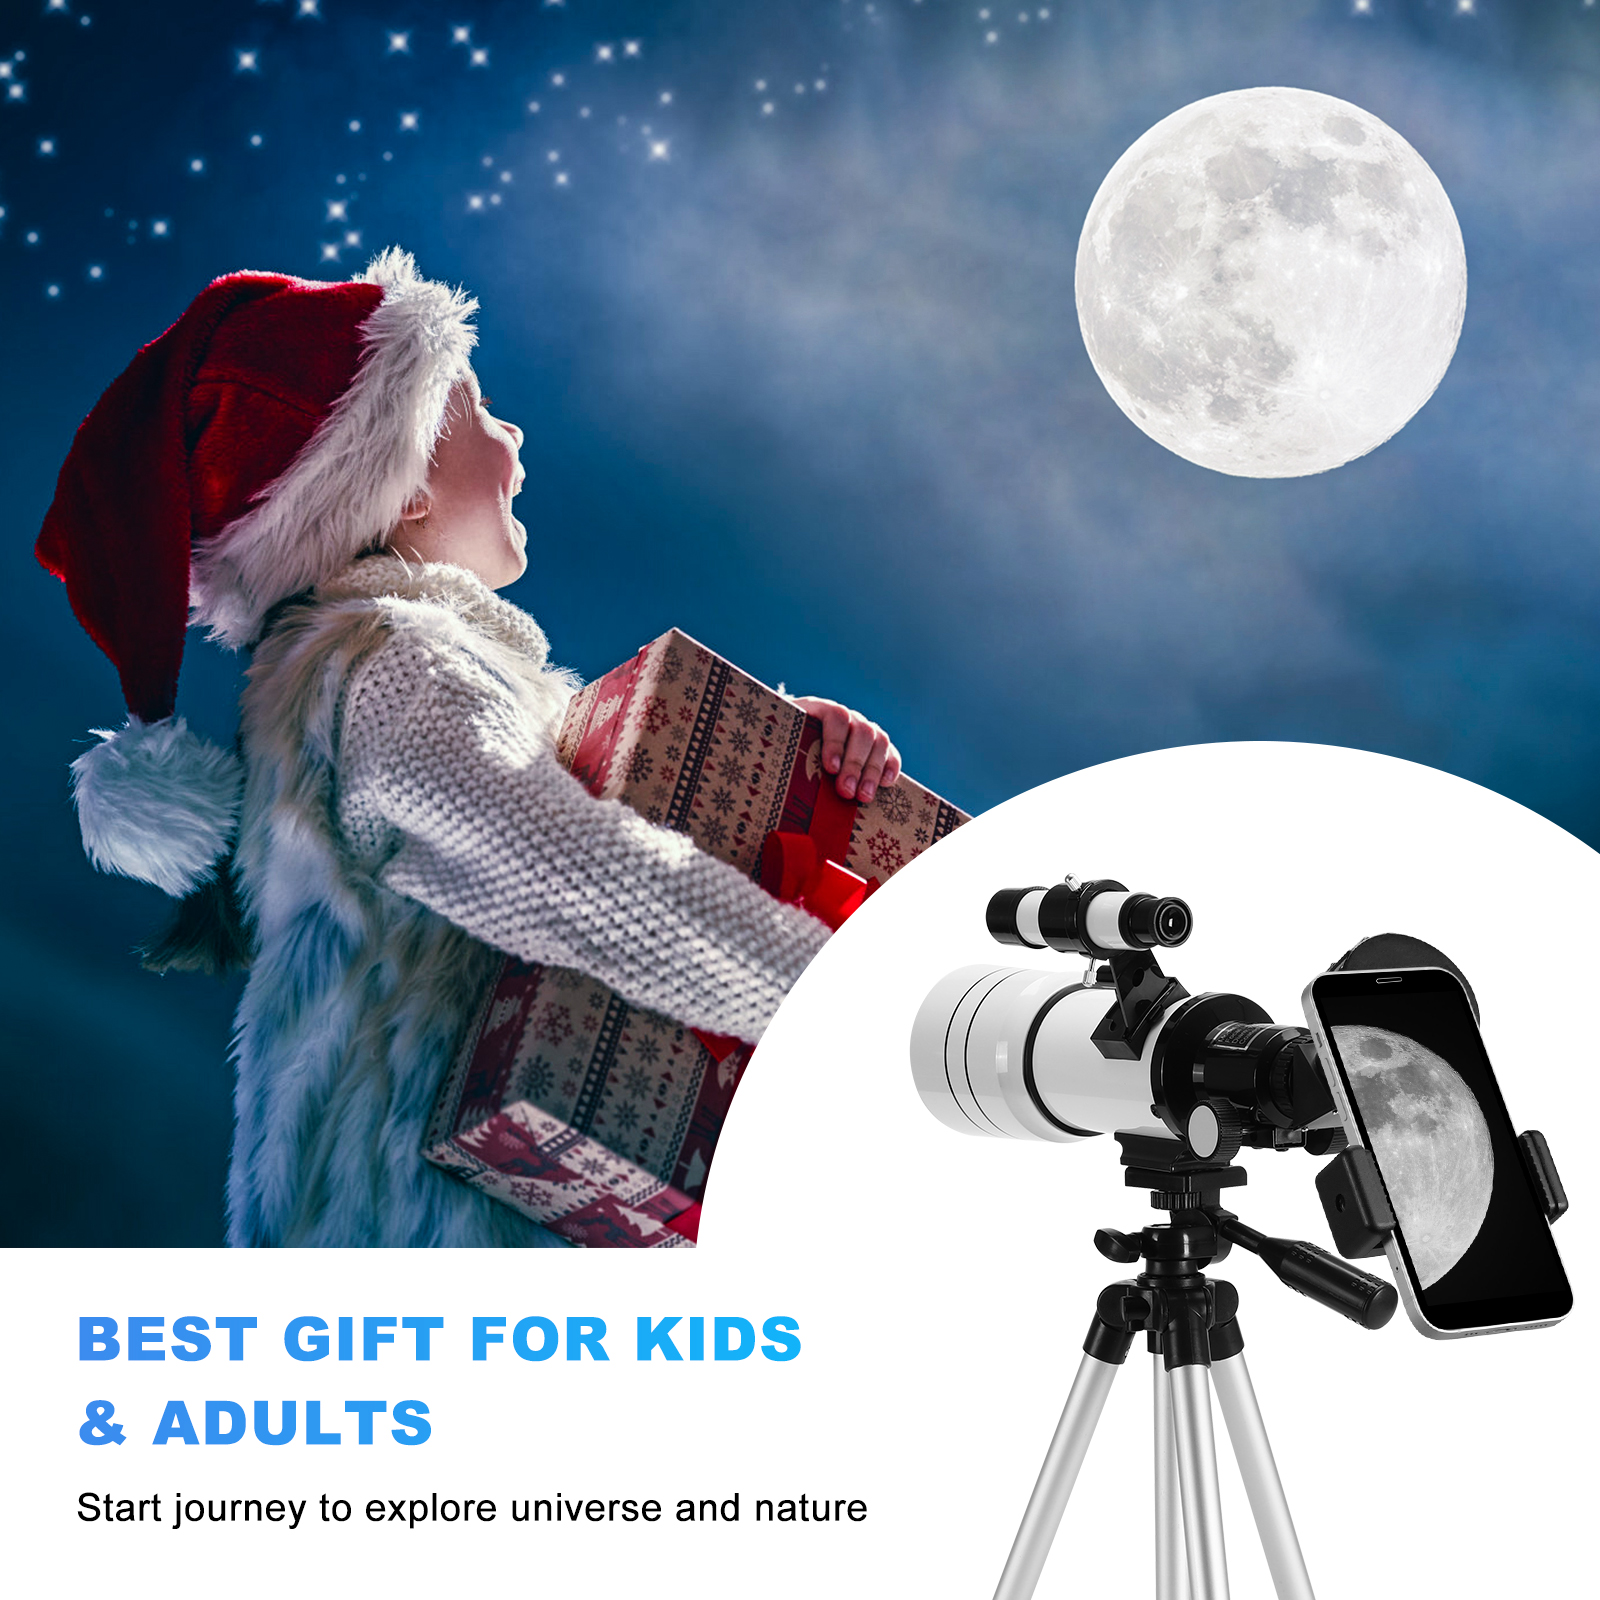 TOPVISION Telescope, 70mm Telescopes for Adults & Kids, 300mm Portable Refractor Telescope (15X-150X) with a Phone Adapter & Adjustable Tripod for Astronomy Beginners, Gift for Kids - image 4 of 10